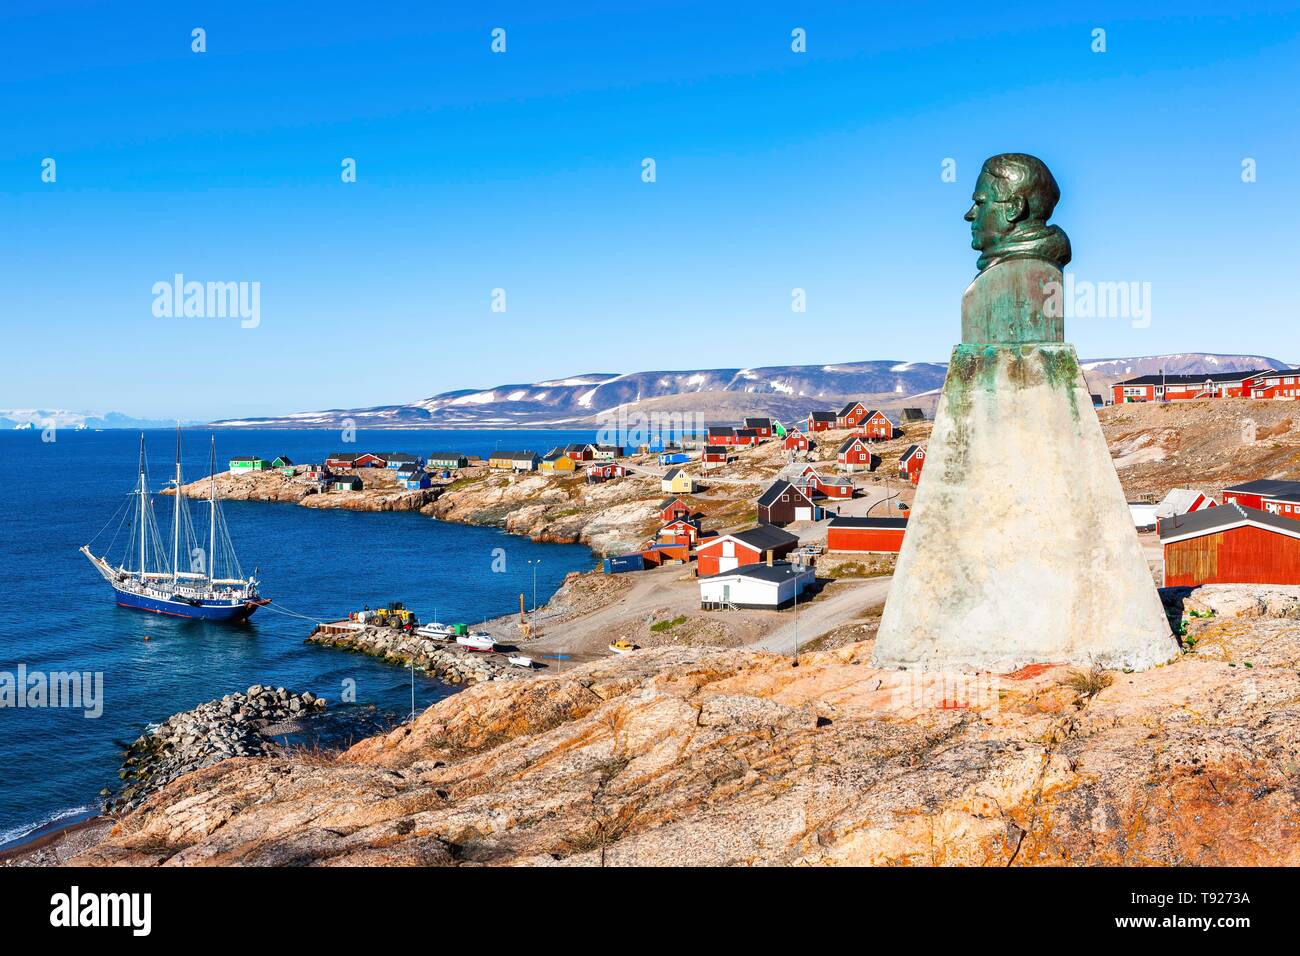 East Greenland town Ittoqqortoormiit with view to the harbour and the statue of Einar Mikkelsen, Scoresbysund, East Greenland, Greenland Stock Photo